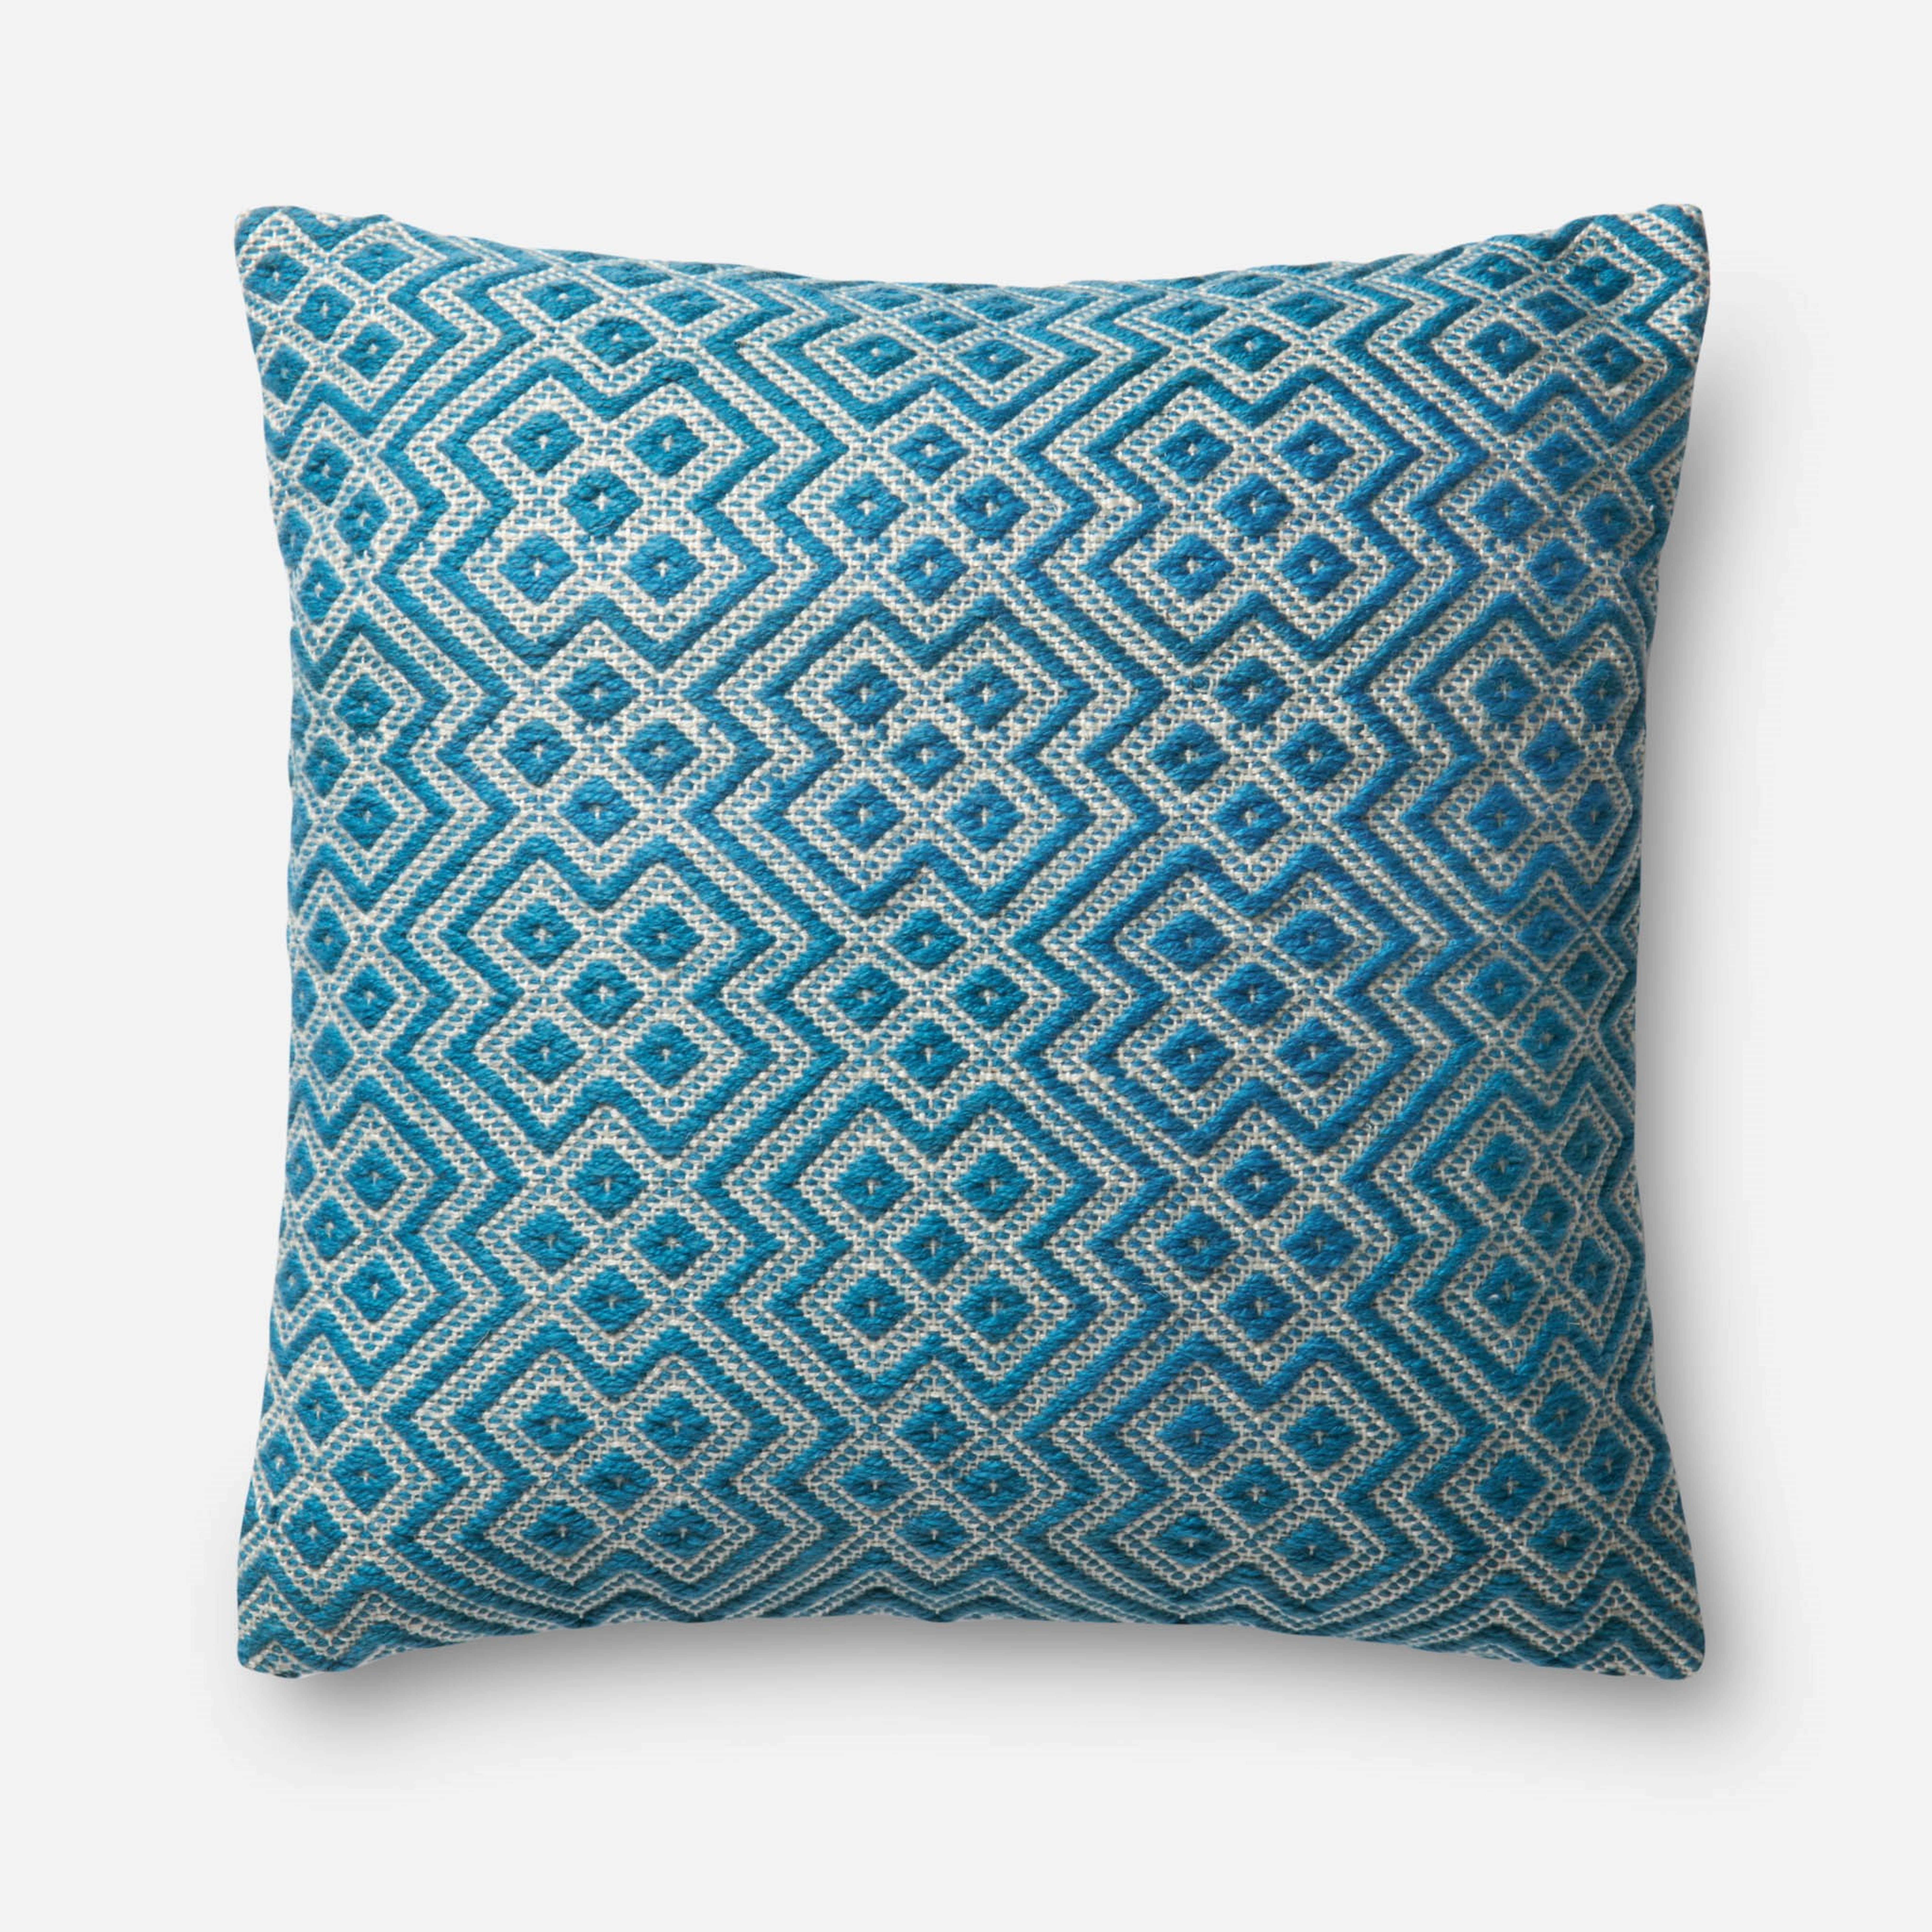 PILLOWS - TEAL / WHITE - 22" X 22" Cover Only - Loma Threads